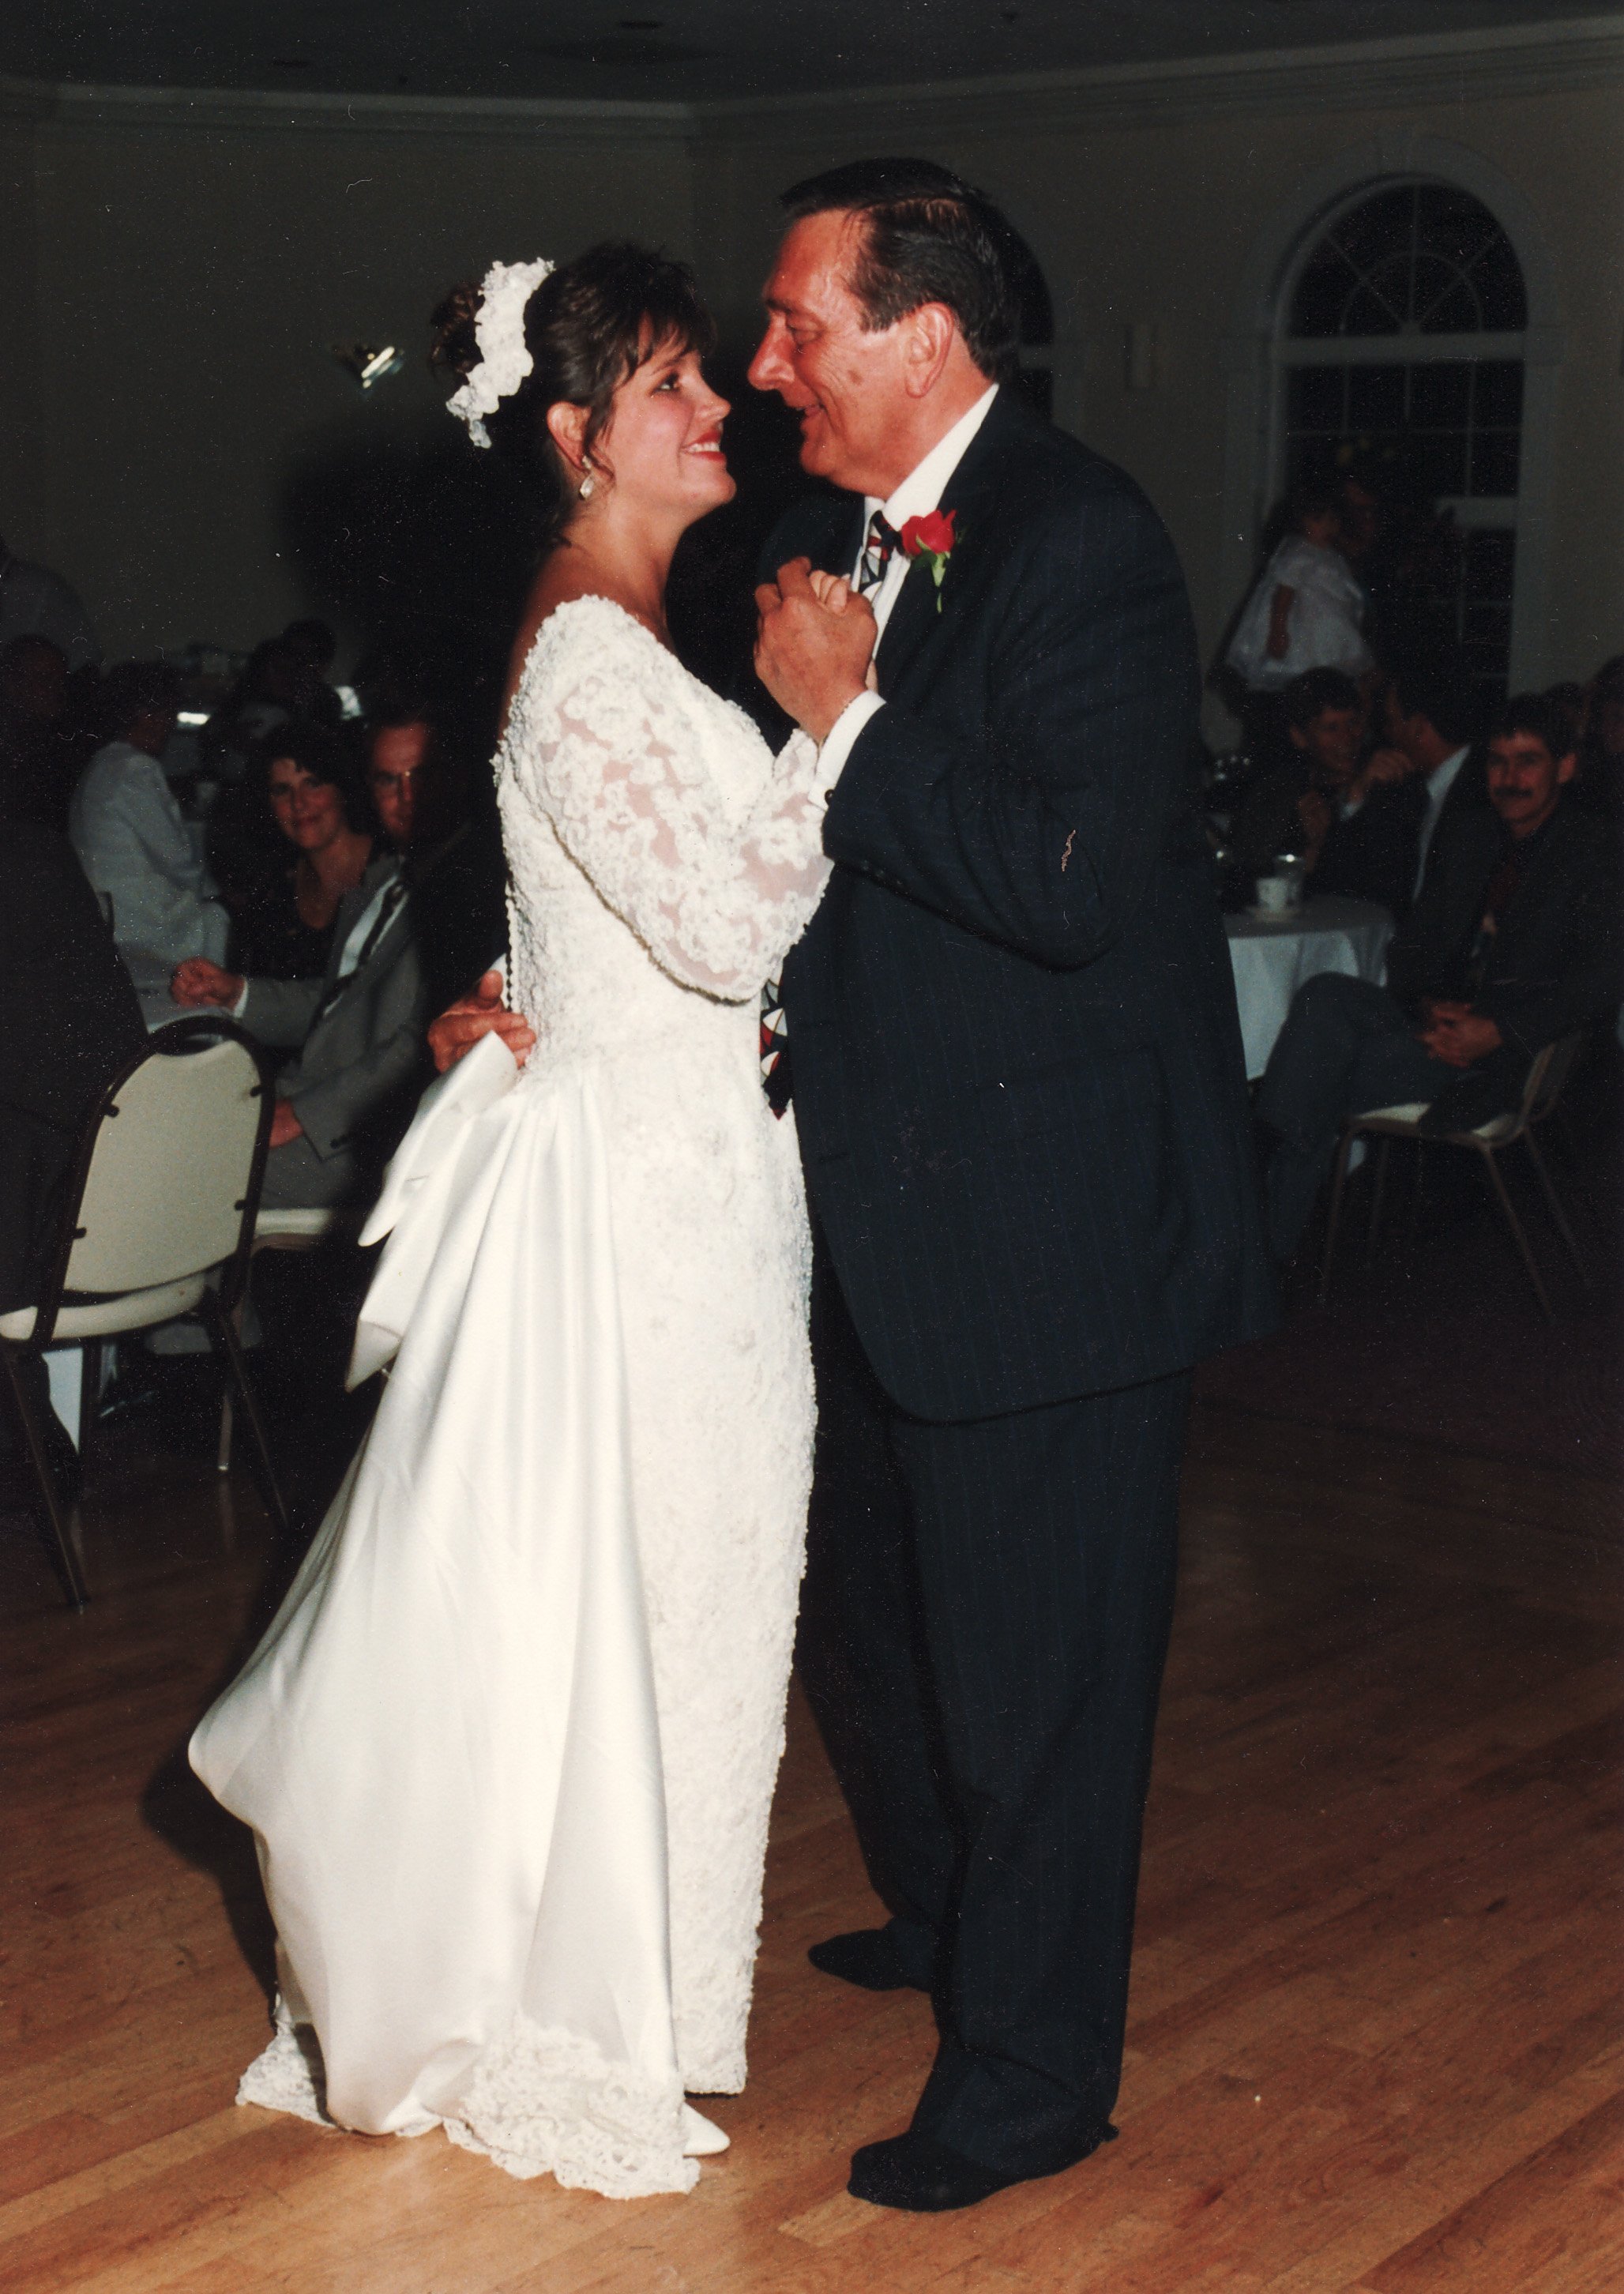 Laurette and her father dancing